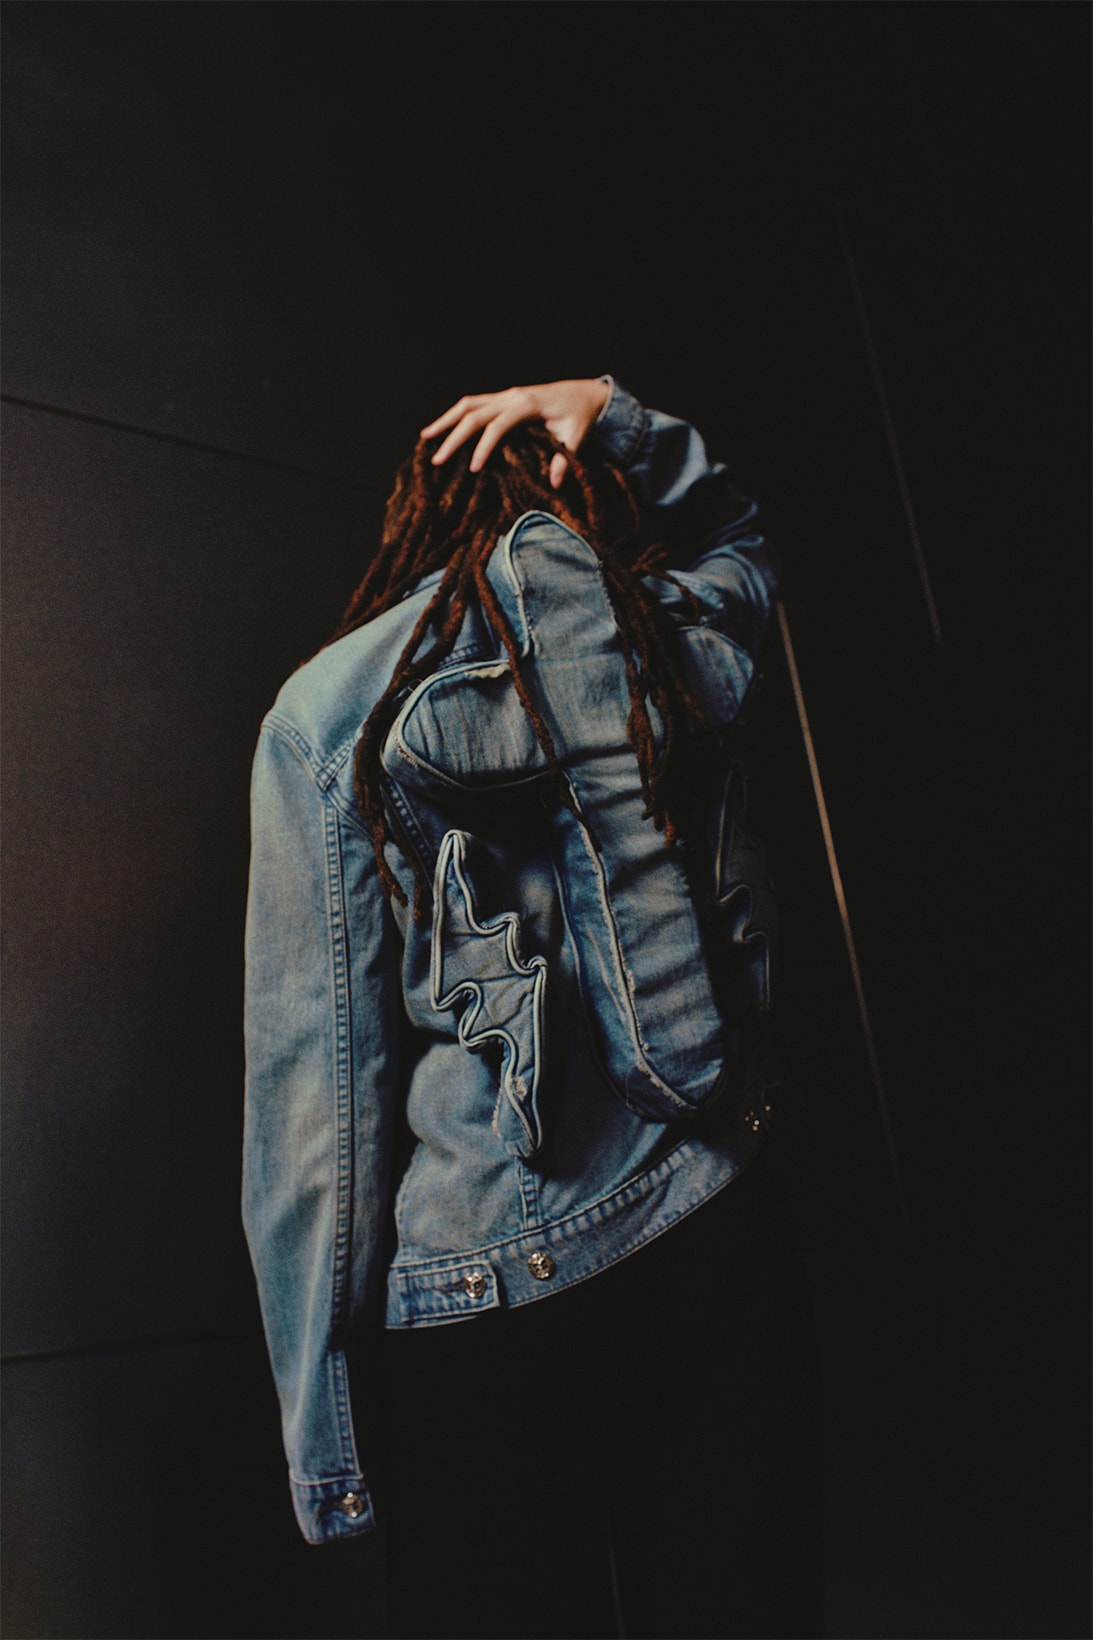 The Weeknd Starboy Seventh Heaven Merch Collection Collaboration Denim jacket